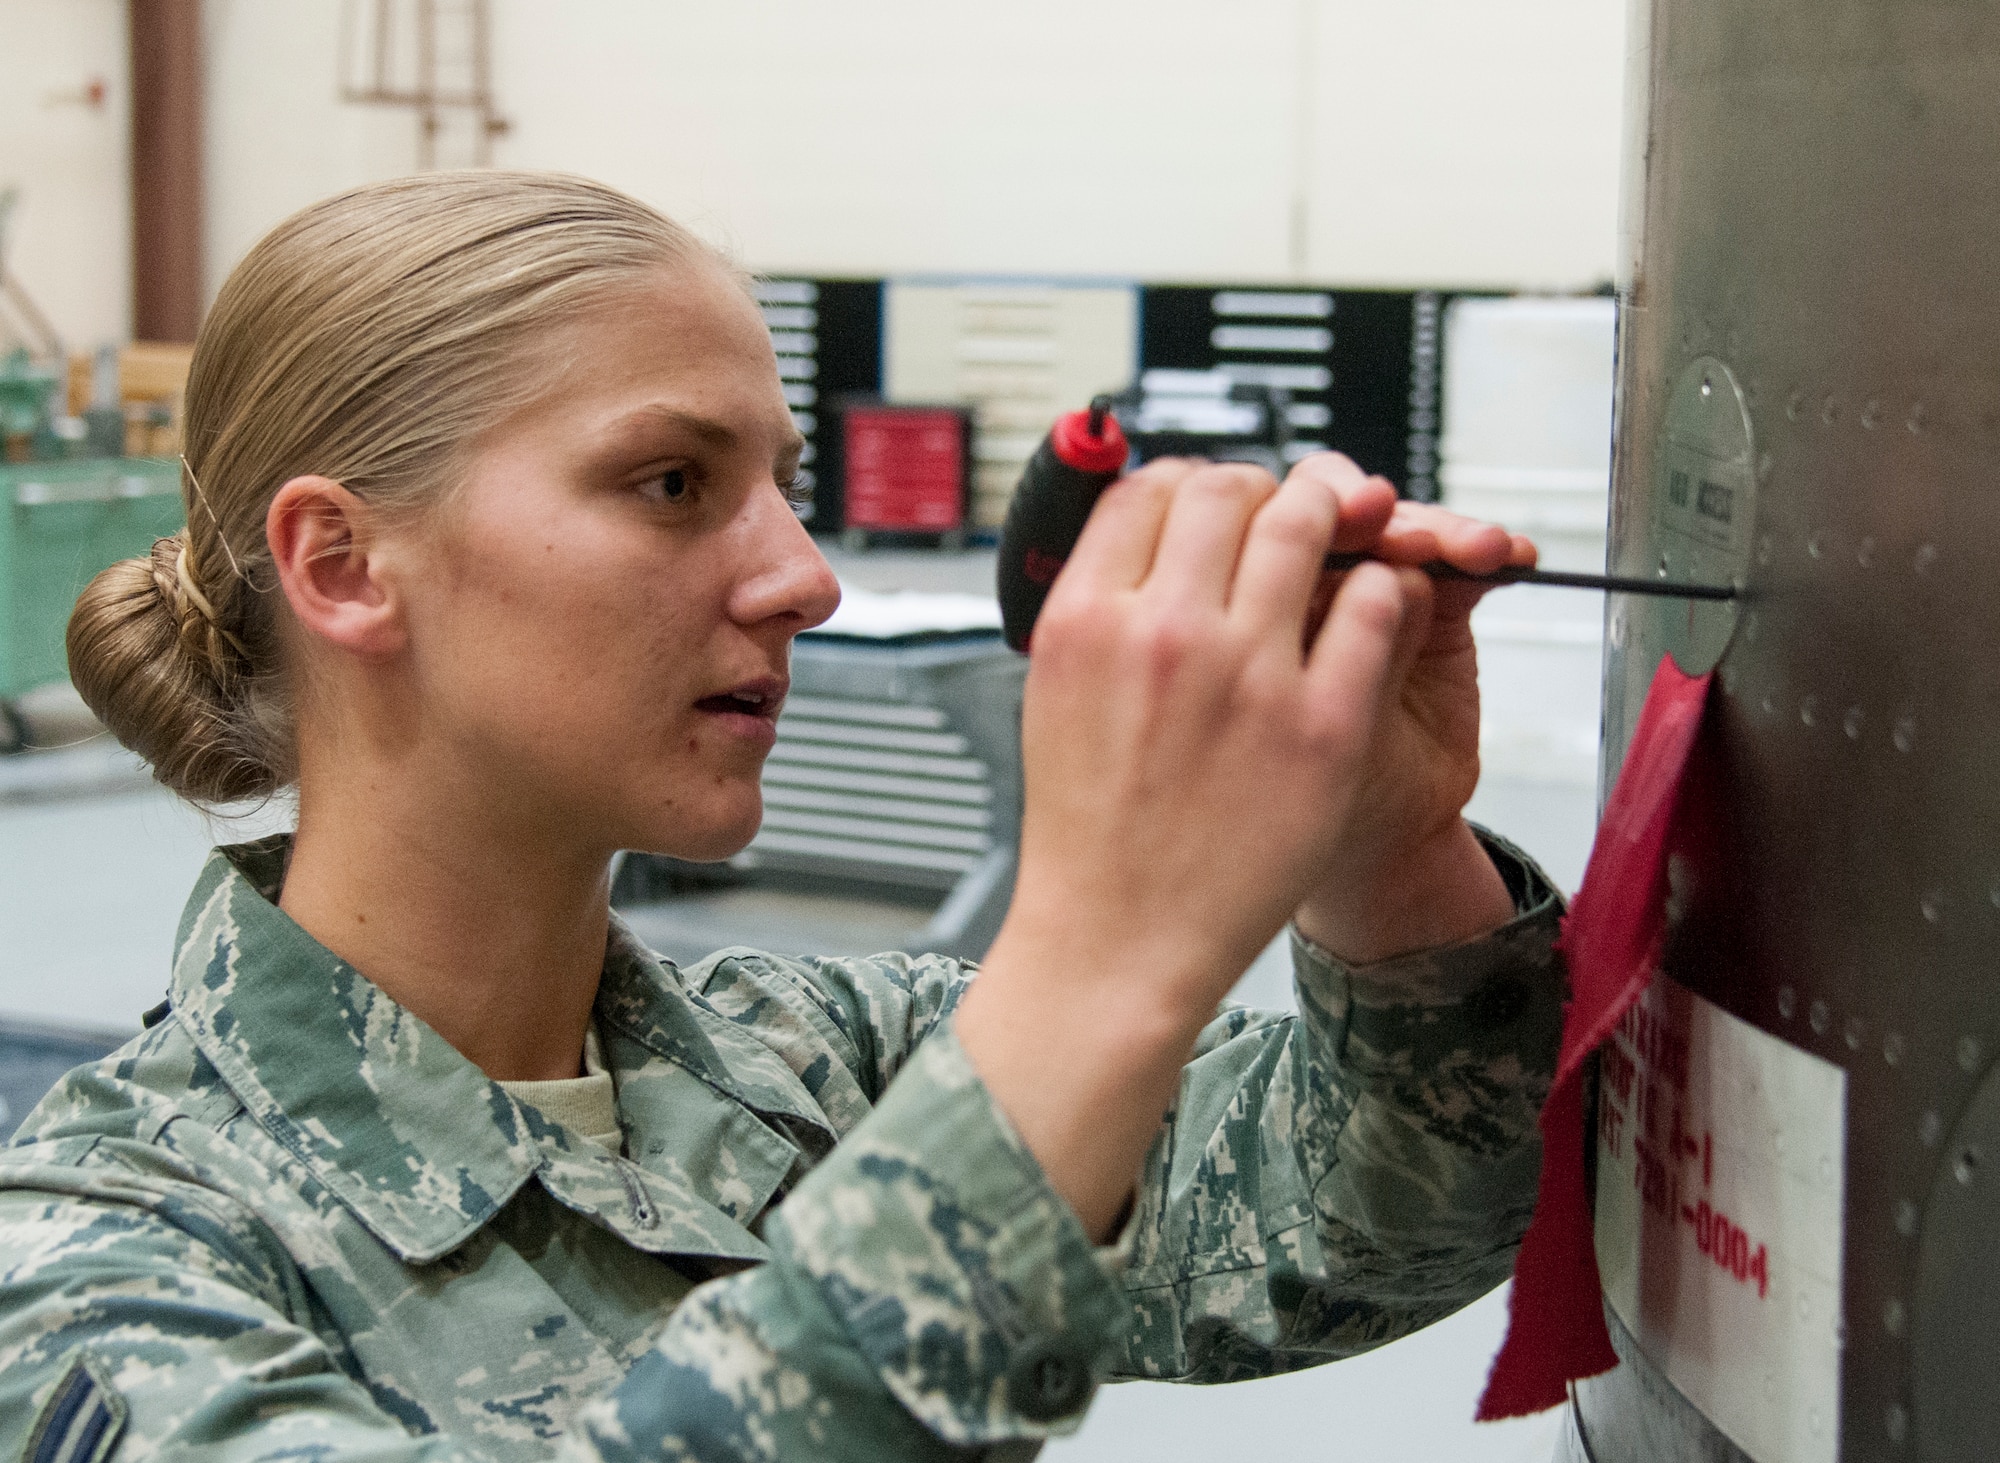 Airman 1st Class Alexis Visser, 90th Munitions Squadron reentry system/reentry vehicle team member, makes adjustments to the aft shroud of a Minuteman III ICBM on F.E. Warren Air Force Base, Wyo., May 19, 2015. Maintainers such as Visser require months of training before they can be certified to perform real maintenance operations. (U.S. Air Force photo by Senior Airman Jason Wiese)